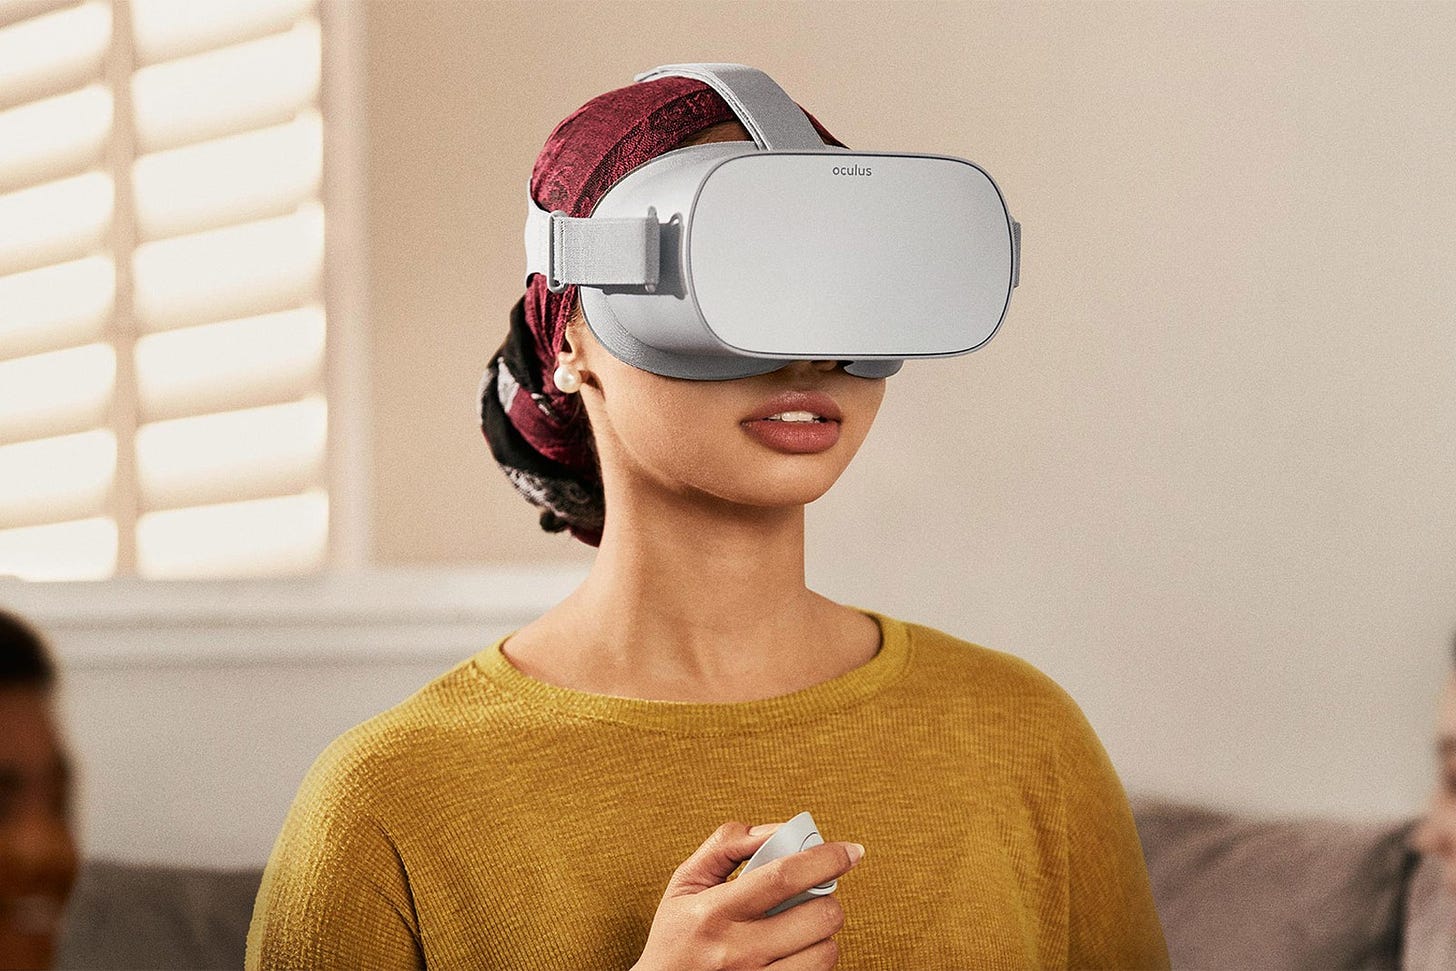 Oculus Go Is the $199 Wireless VR Headset You Need to Try